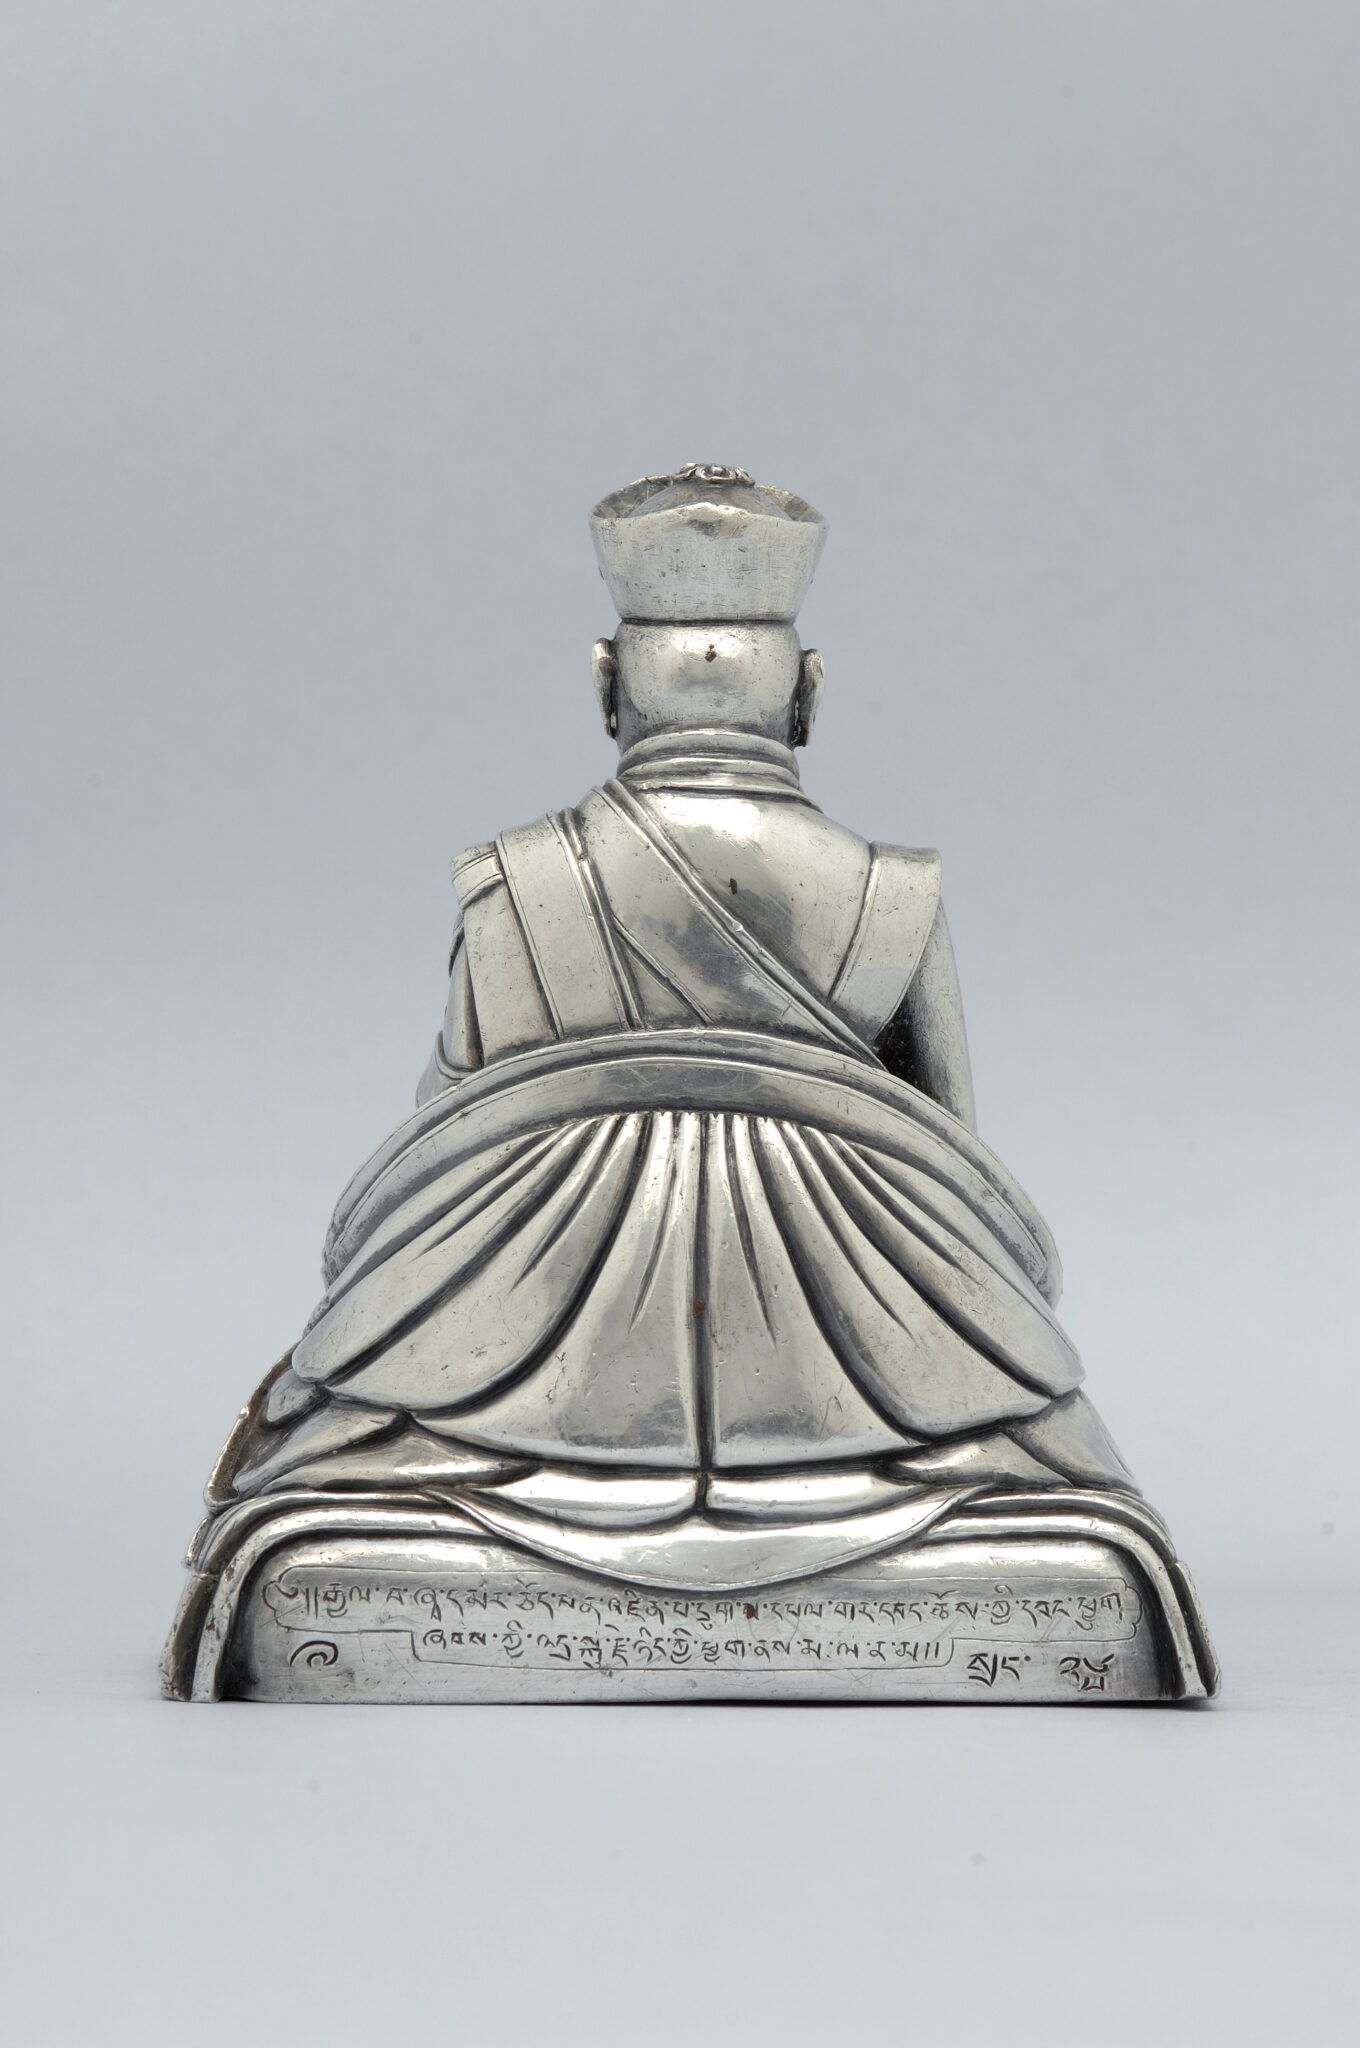 Back view of silver statuette depicting seated figure wearing finely modeled robe; two lines of text inscribed on base